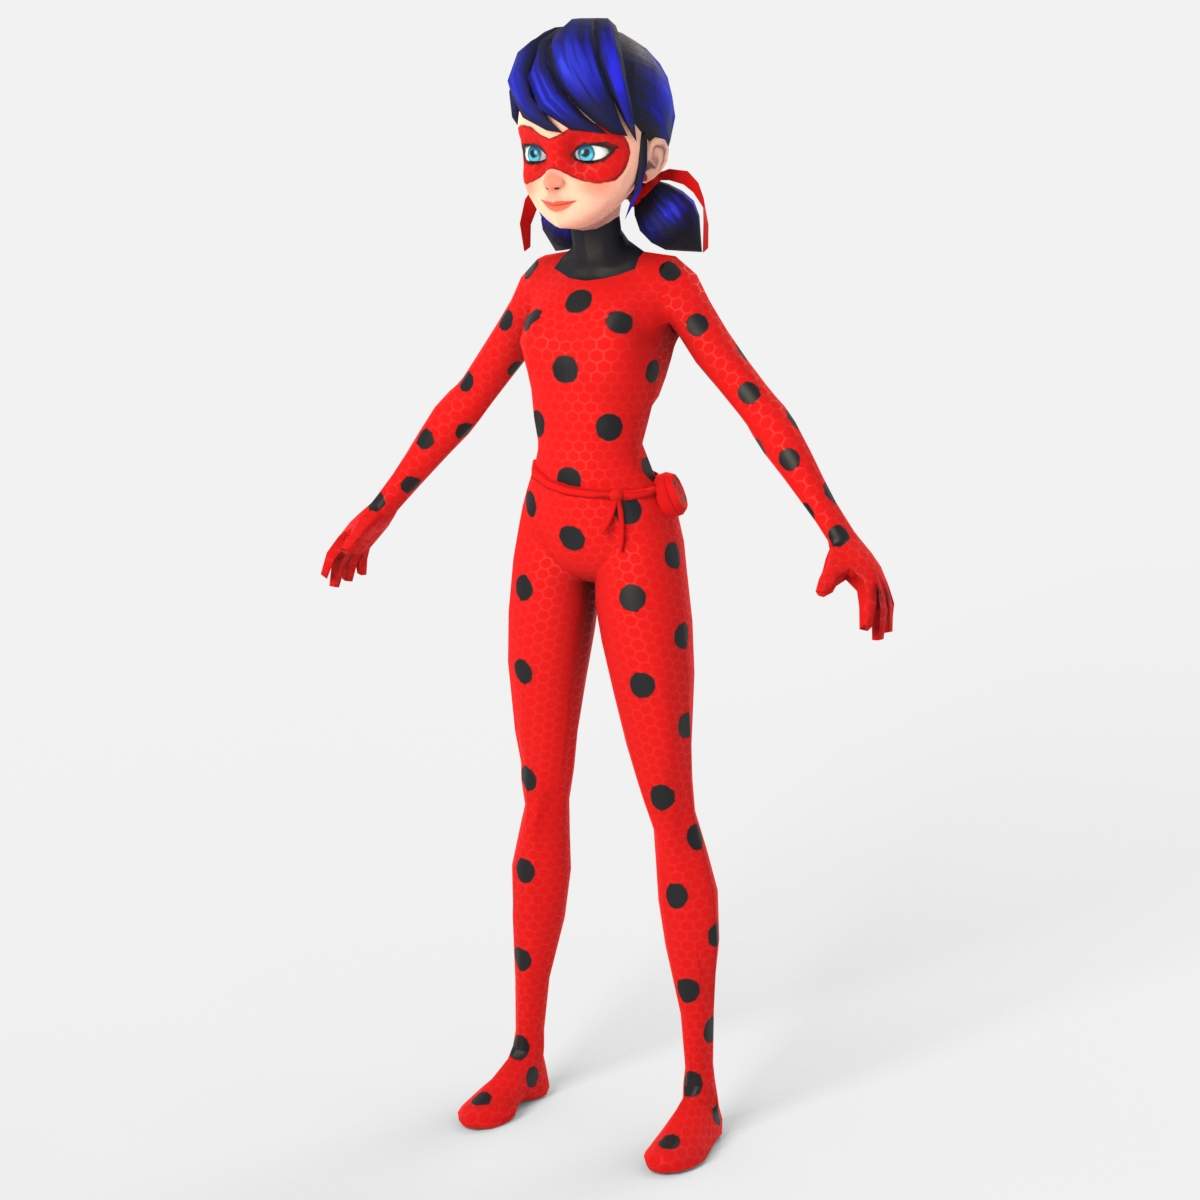 Free 3d Models Cat Cheat Promo Codes Robux For Roblox